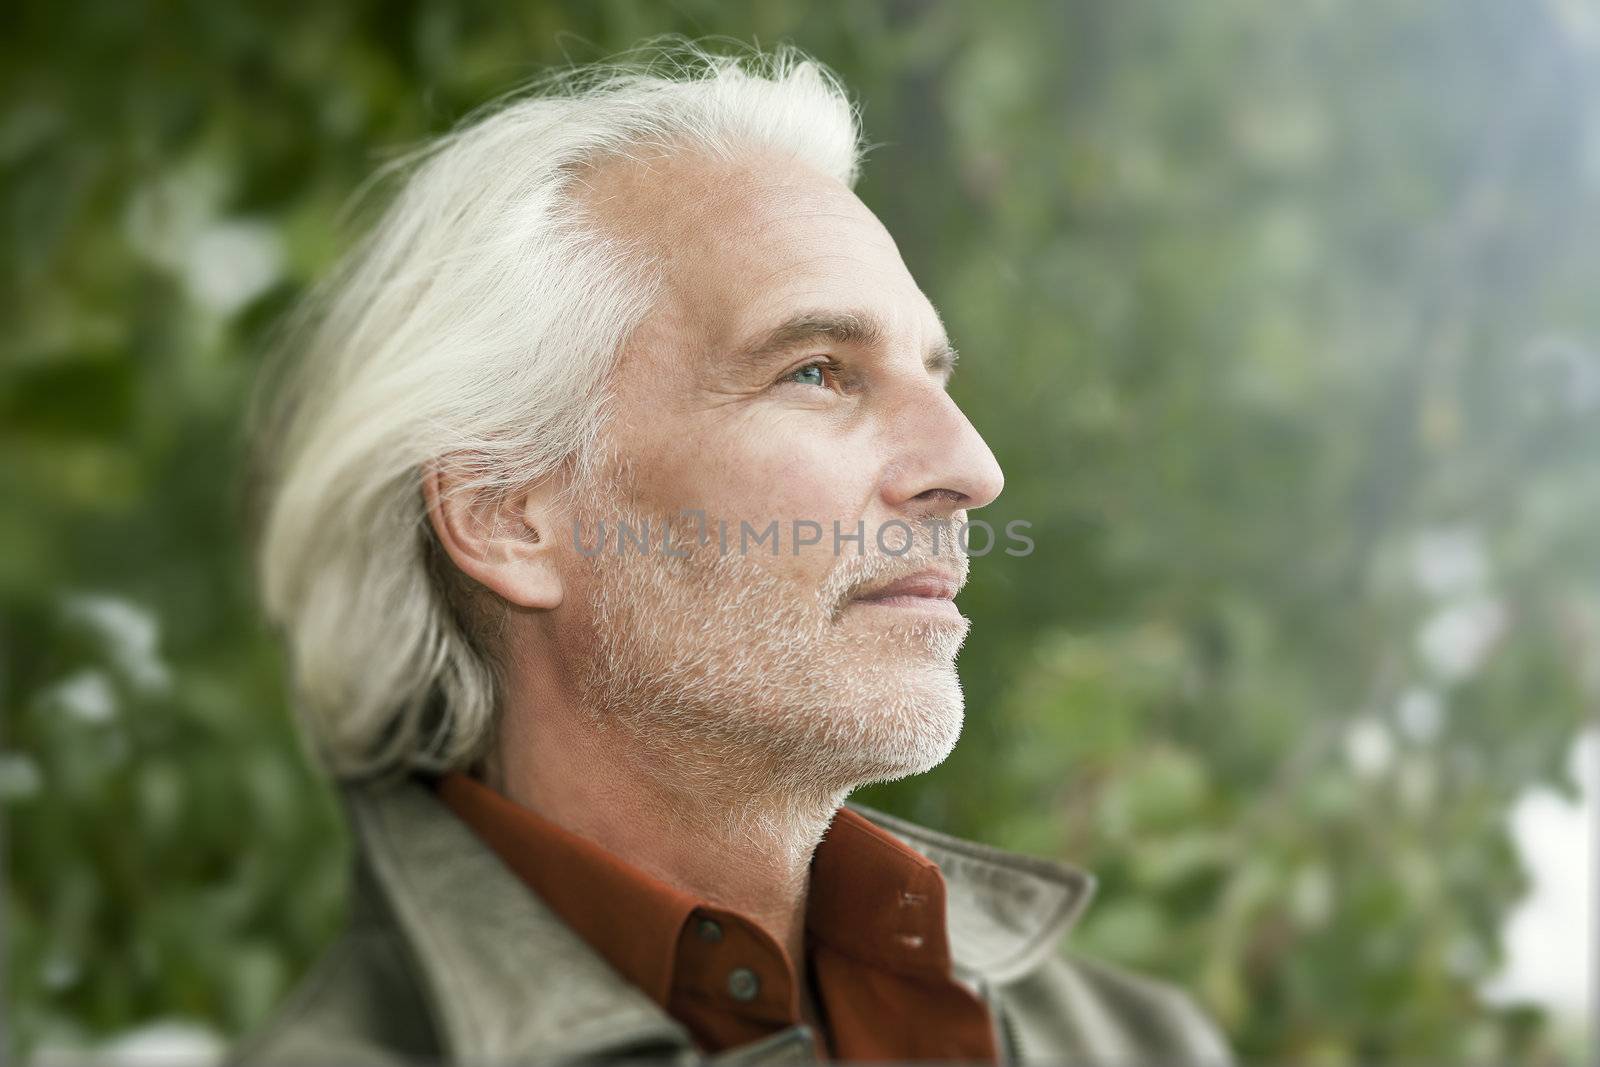 An image of a handsome male portrait with white beard